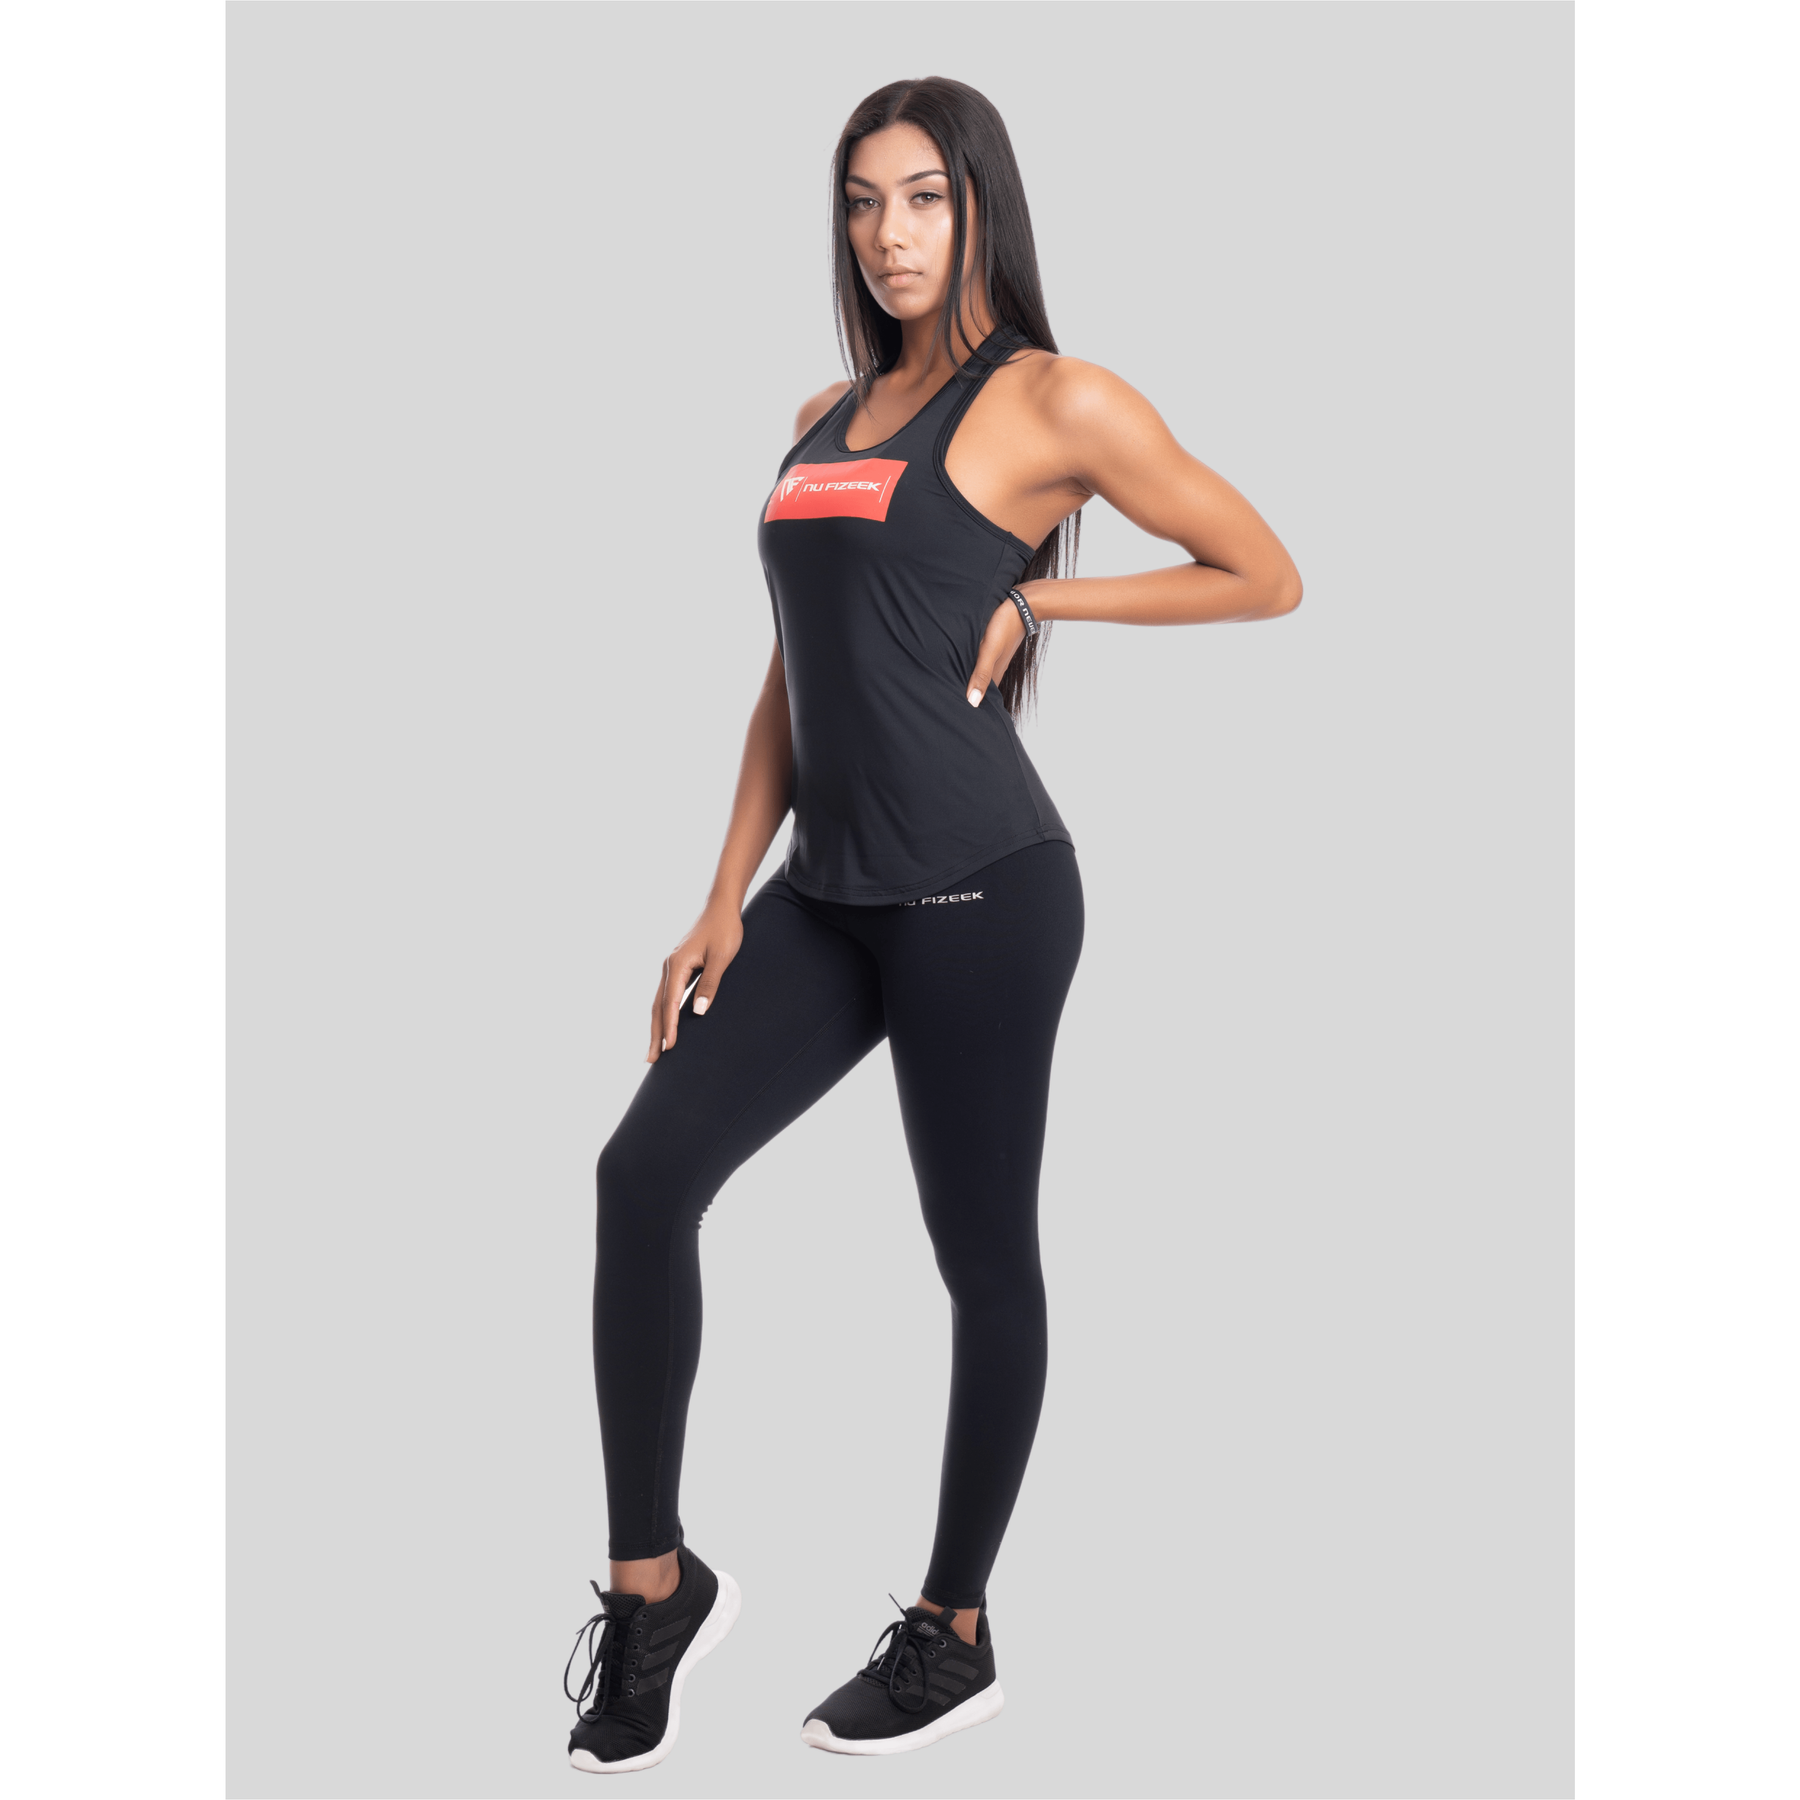 FITG18® Gym wear Leggings Ankle Length Workout Trousers|Stretchable Striped  Leggings | High Waist